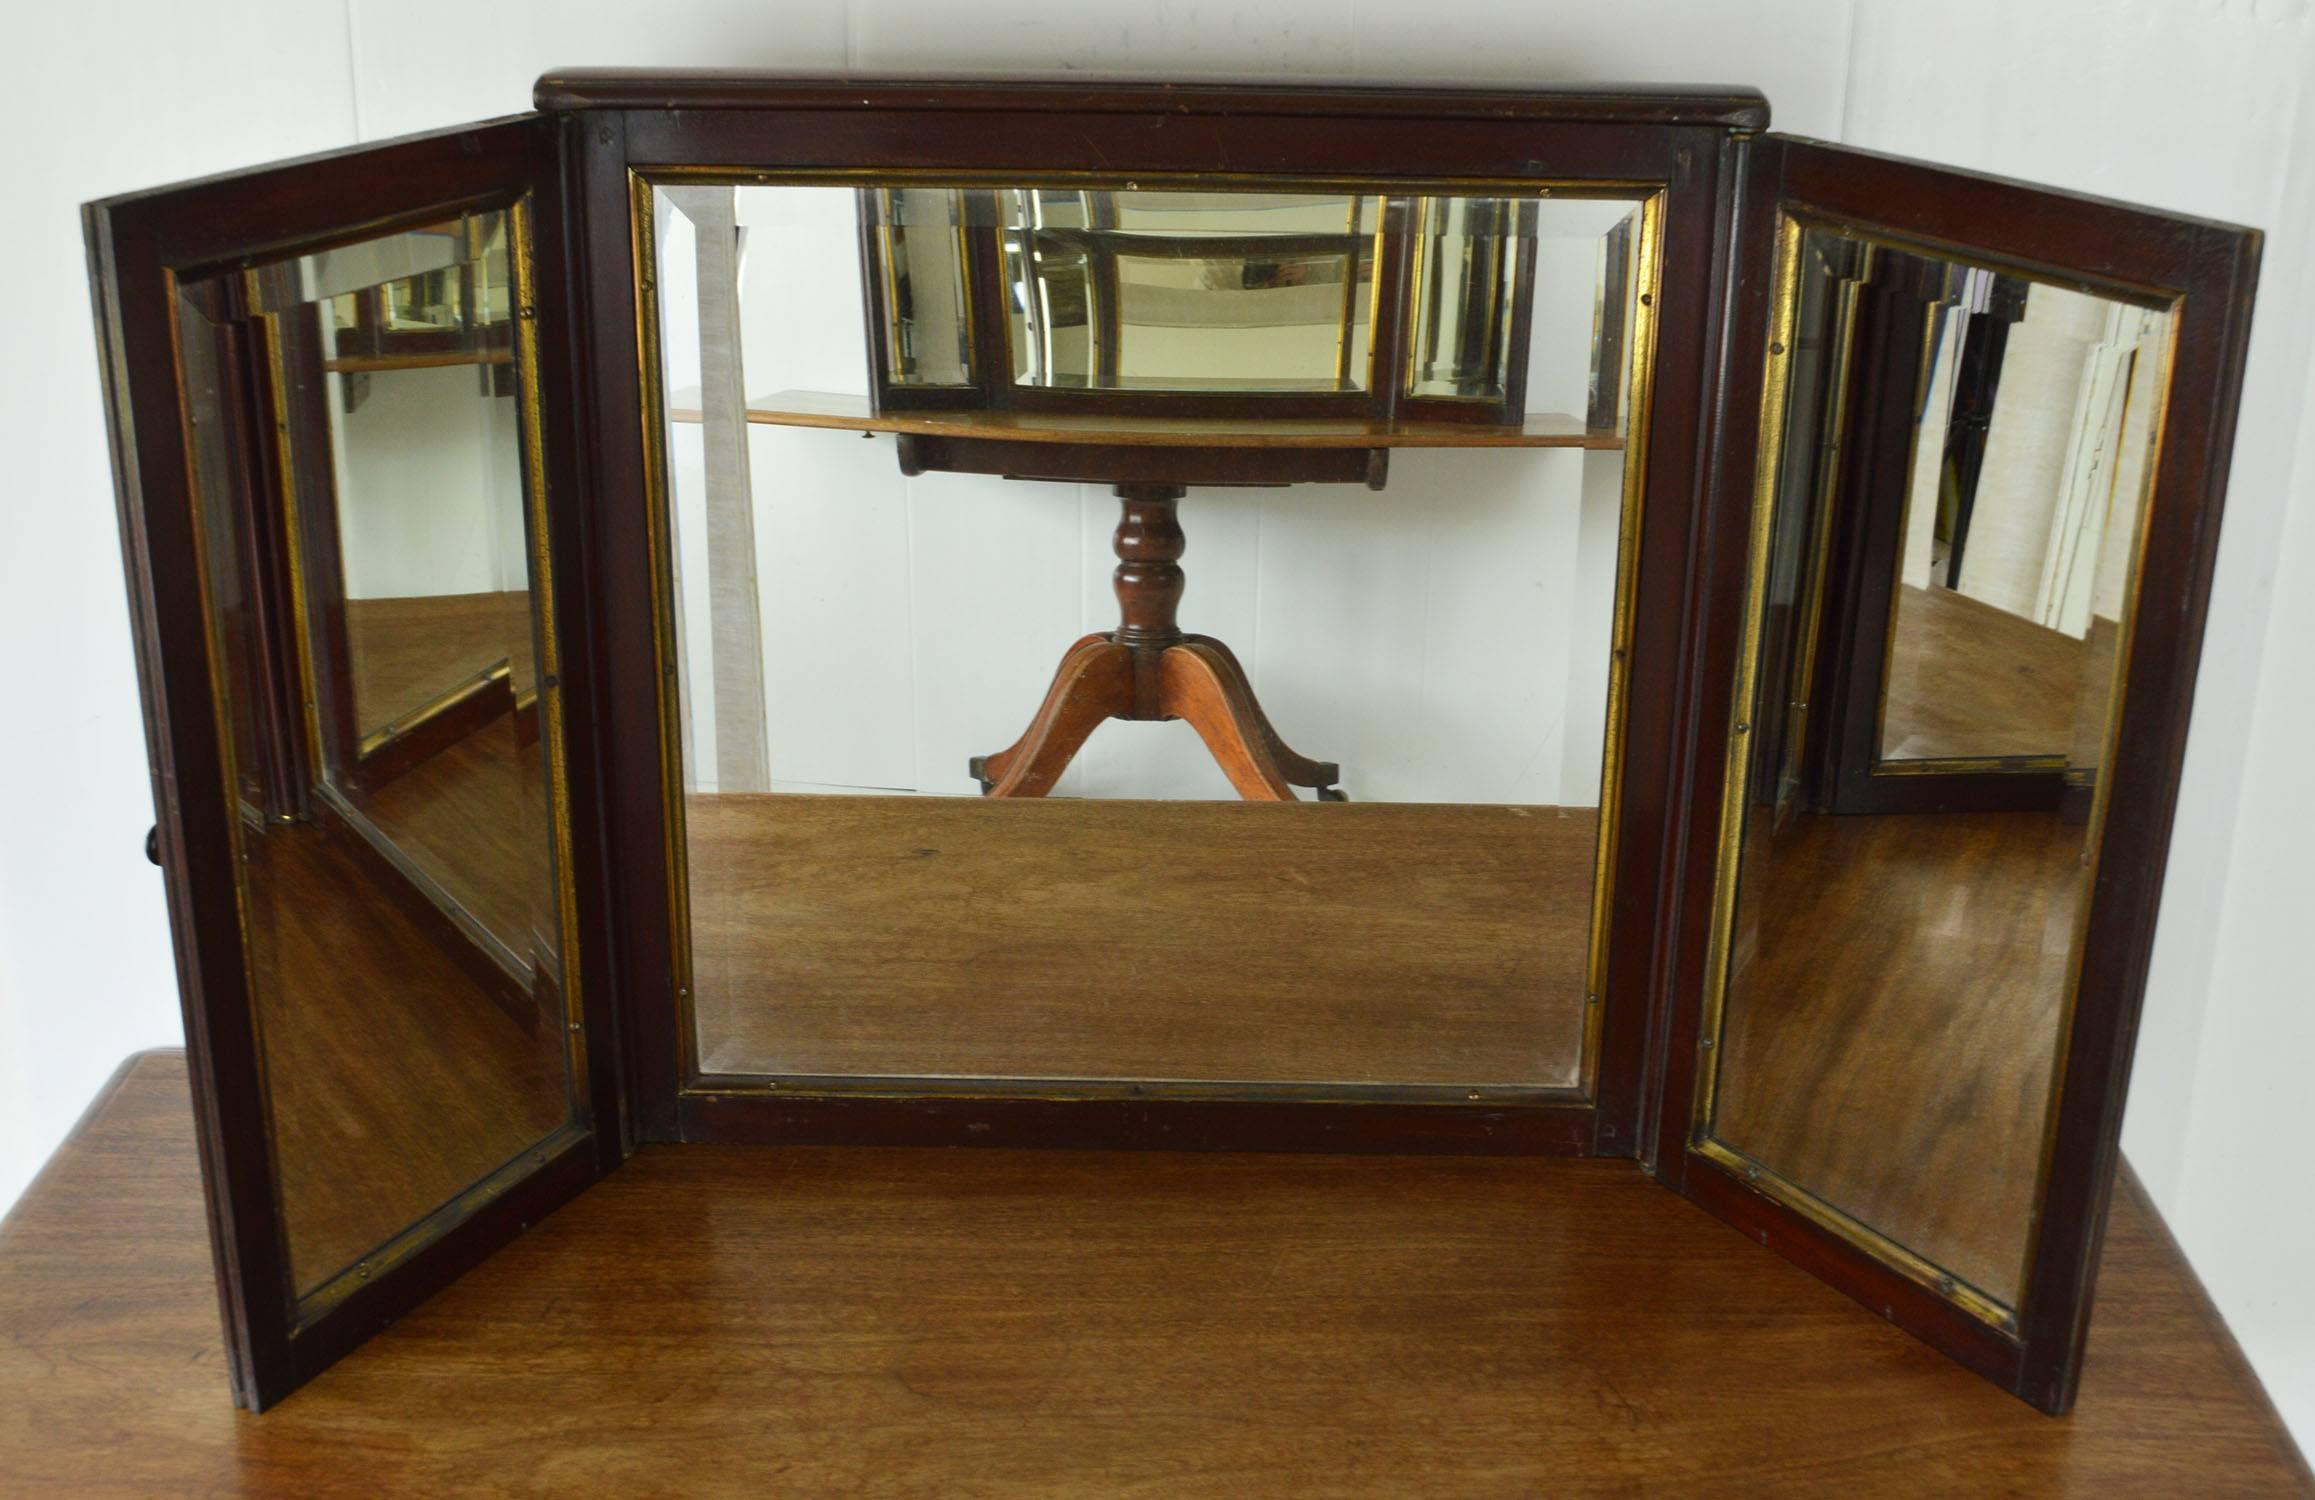 Very smart and superb quality campaign or folding gentleman's dressing table mirror.

The Honduras mahogany has a wonderful rich color. The brass trim is oil gilded and left in its original condition. (Not polished)

The bevelled mirrors are